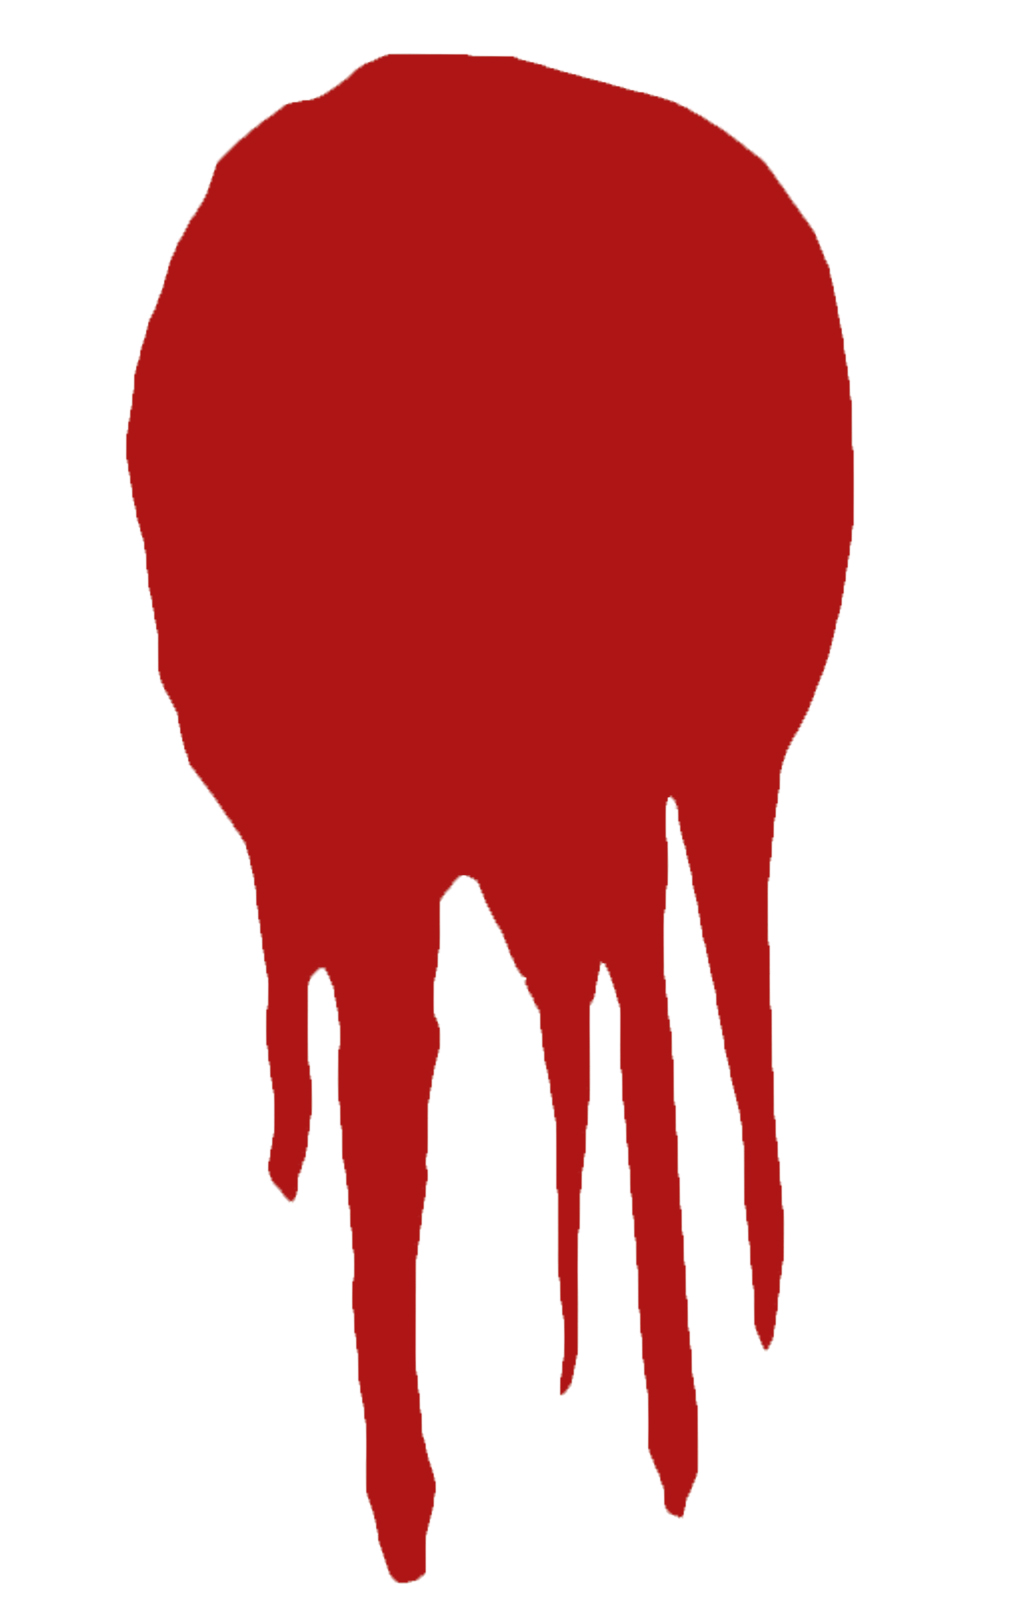 11 Blood Splatter Images Free Free Cliparts That You Can Download To